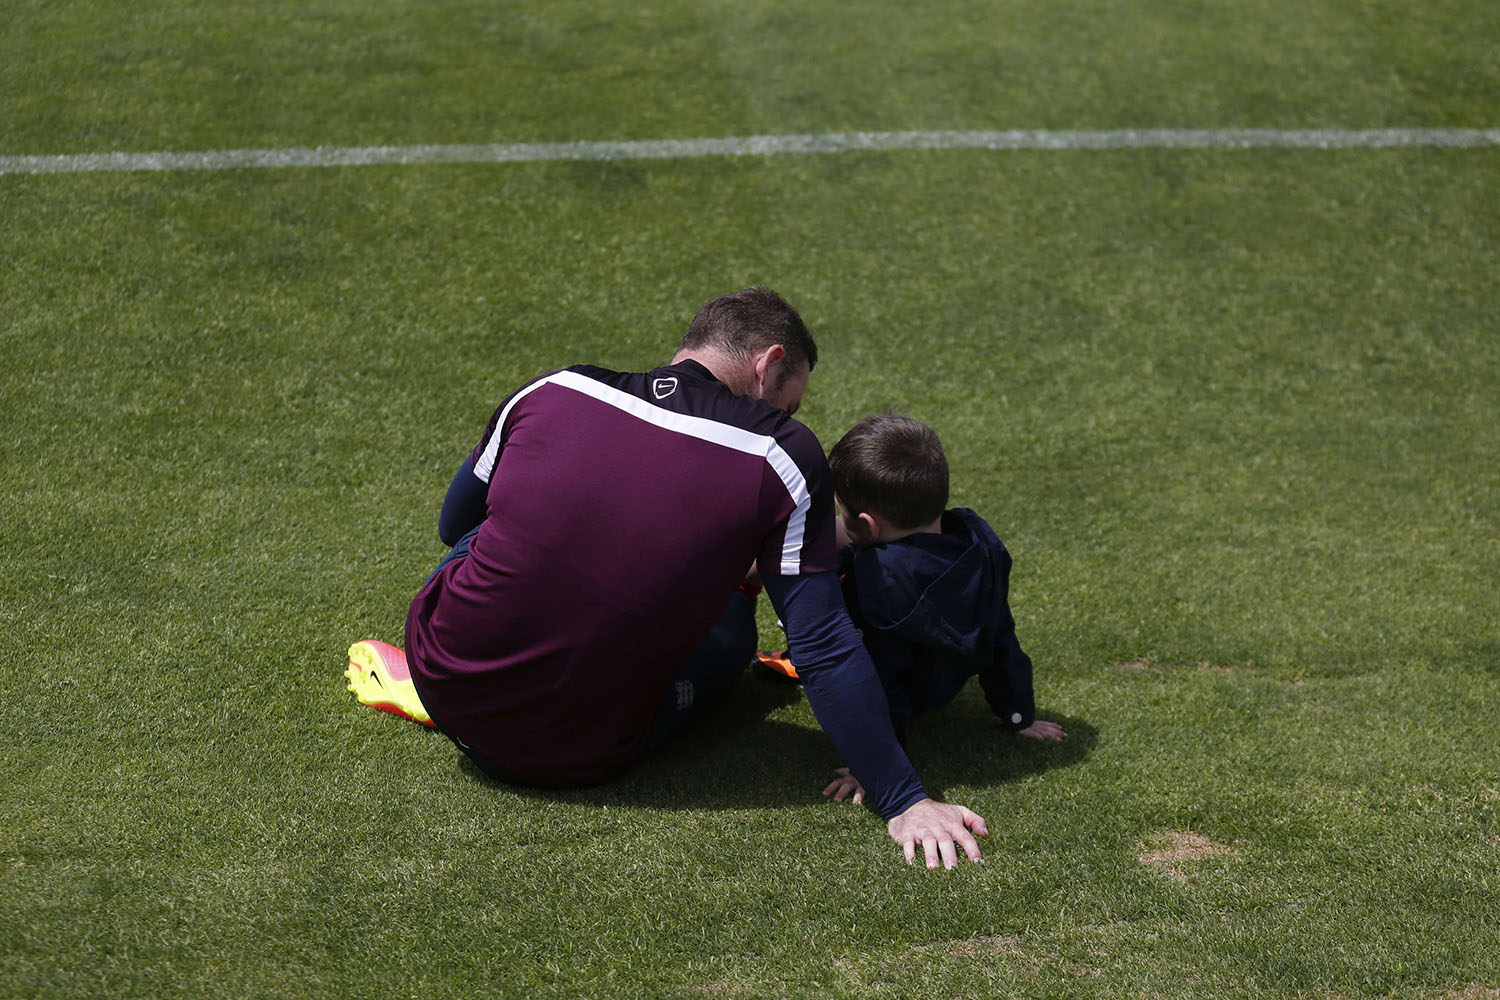 England's national soccer team player Wayne Rooney speaks with his son, Kai, after a training session in Almancil, near Faro in Portugal, on May 21, 2014.